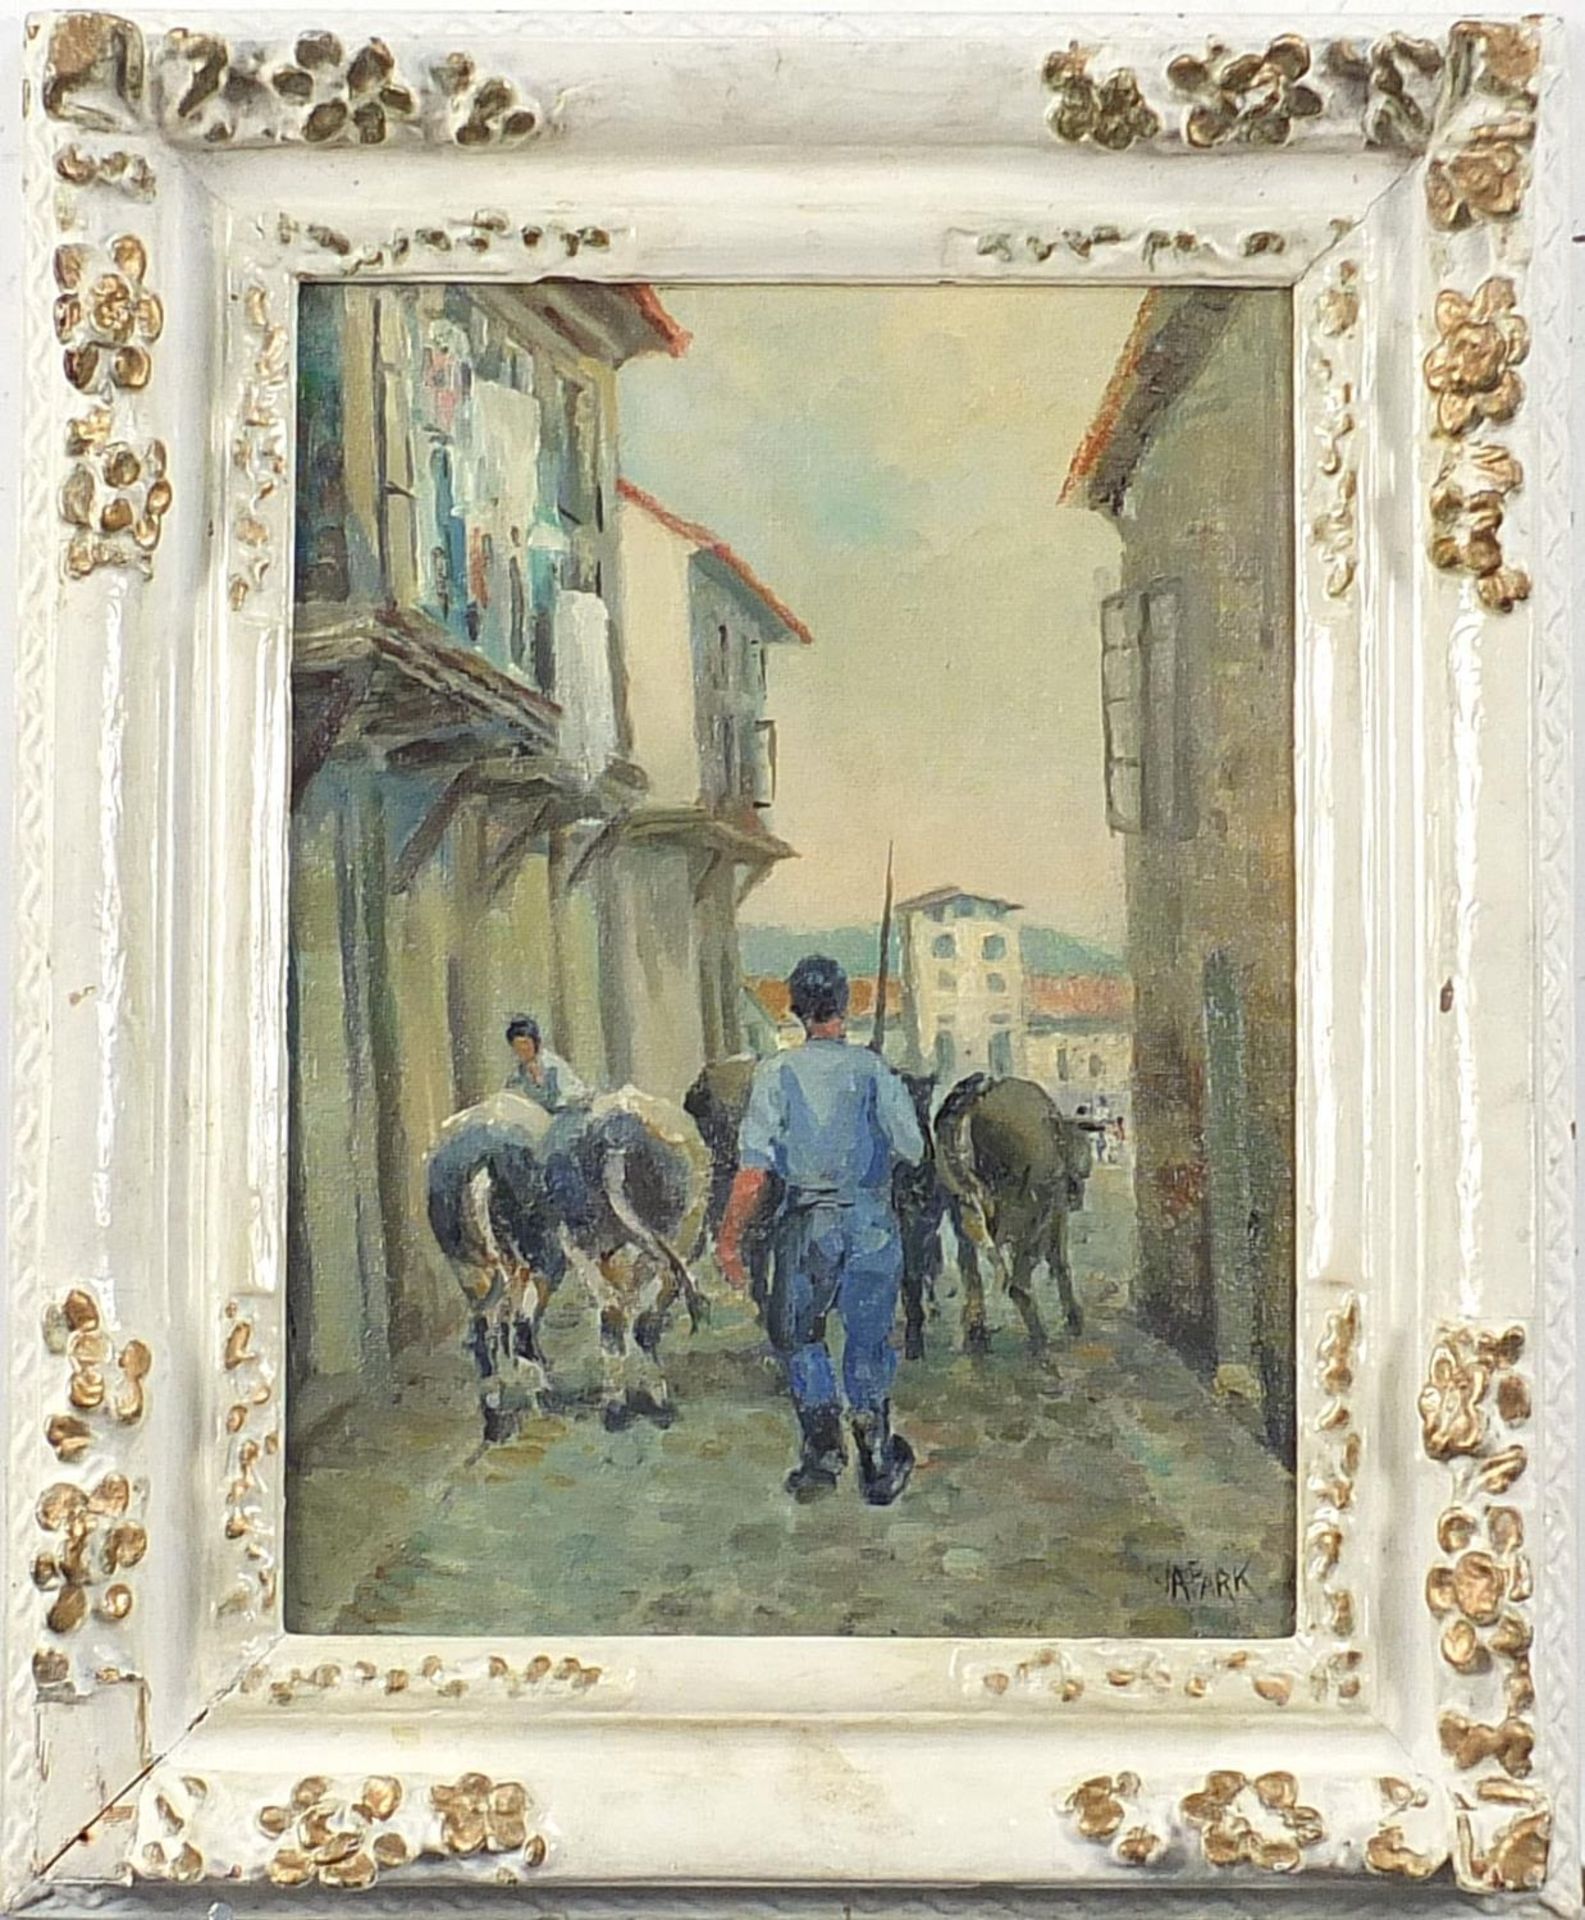 Street scene with figures and cows, St Ives school oil on board, mounted and framed, 34cm x 25cm - Image 2 of 5